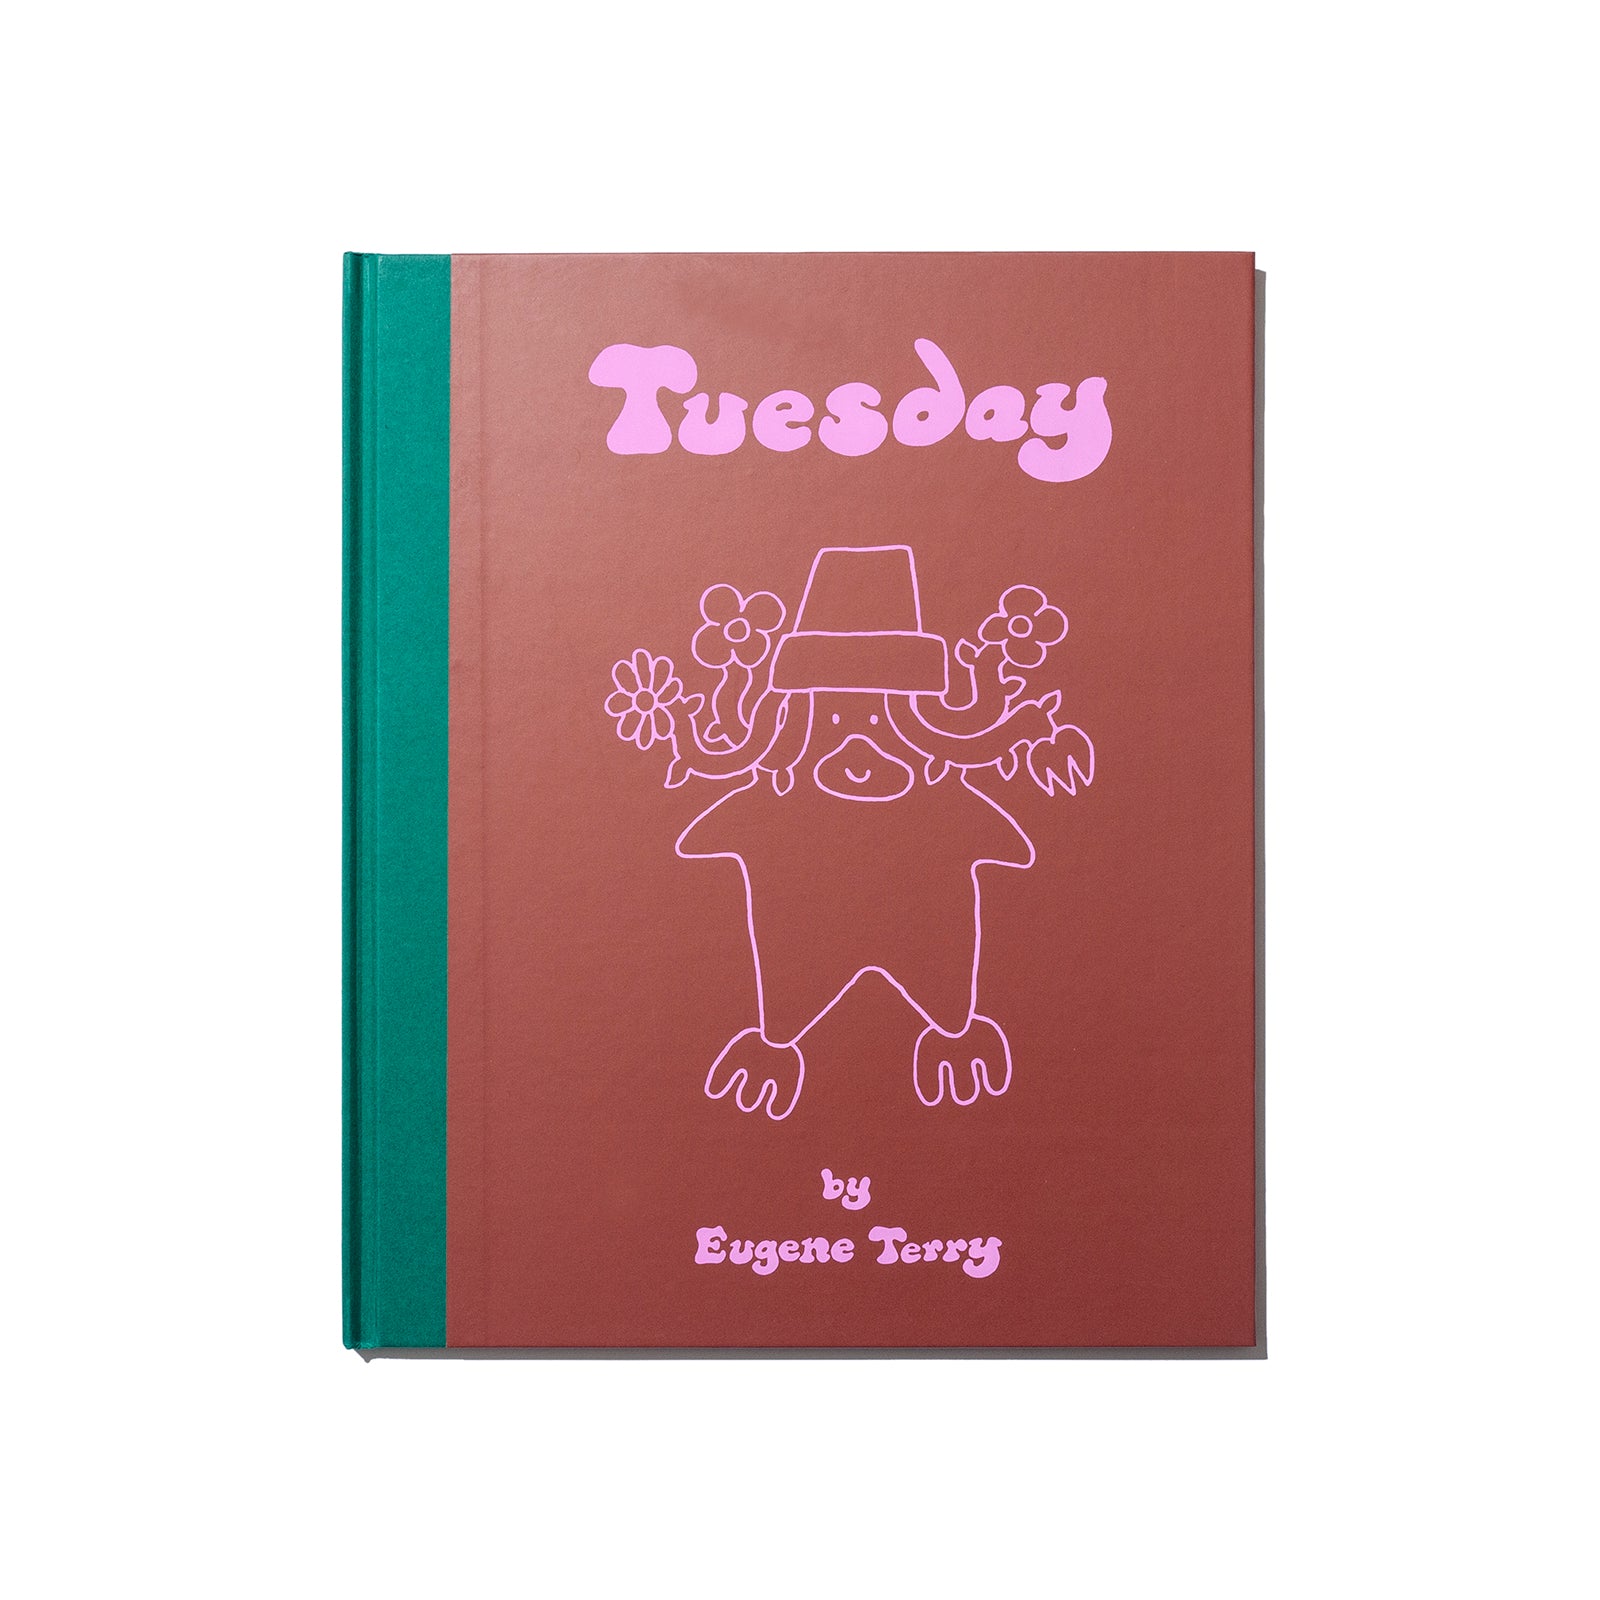 Tuesday by Eugene Terry